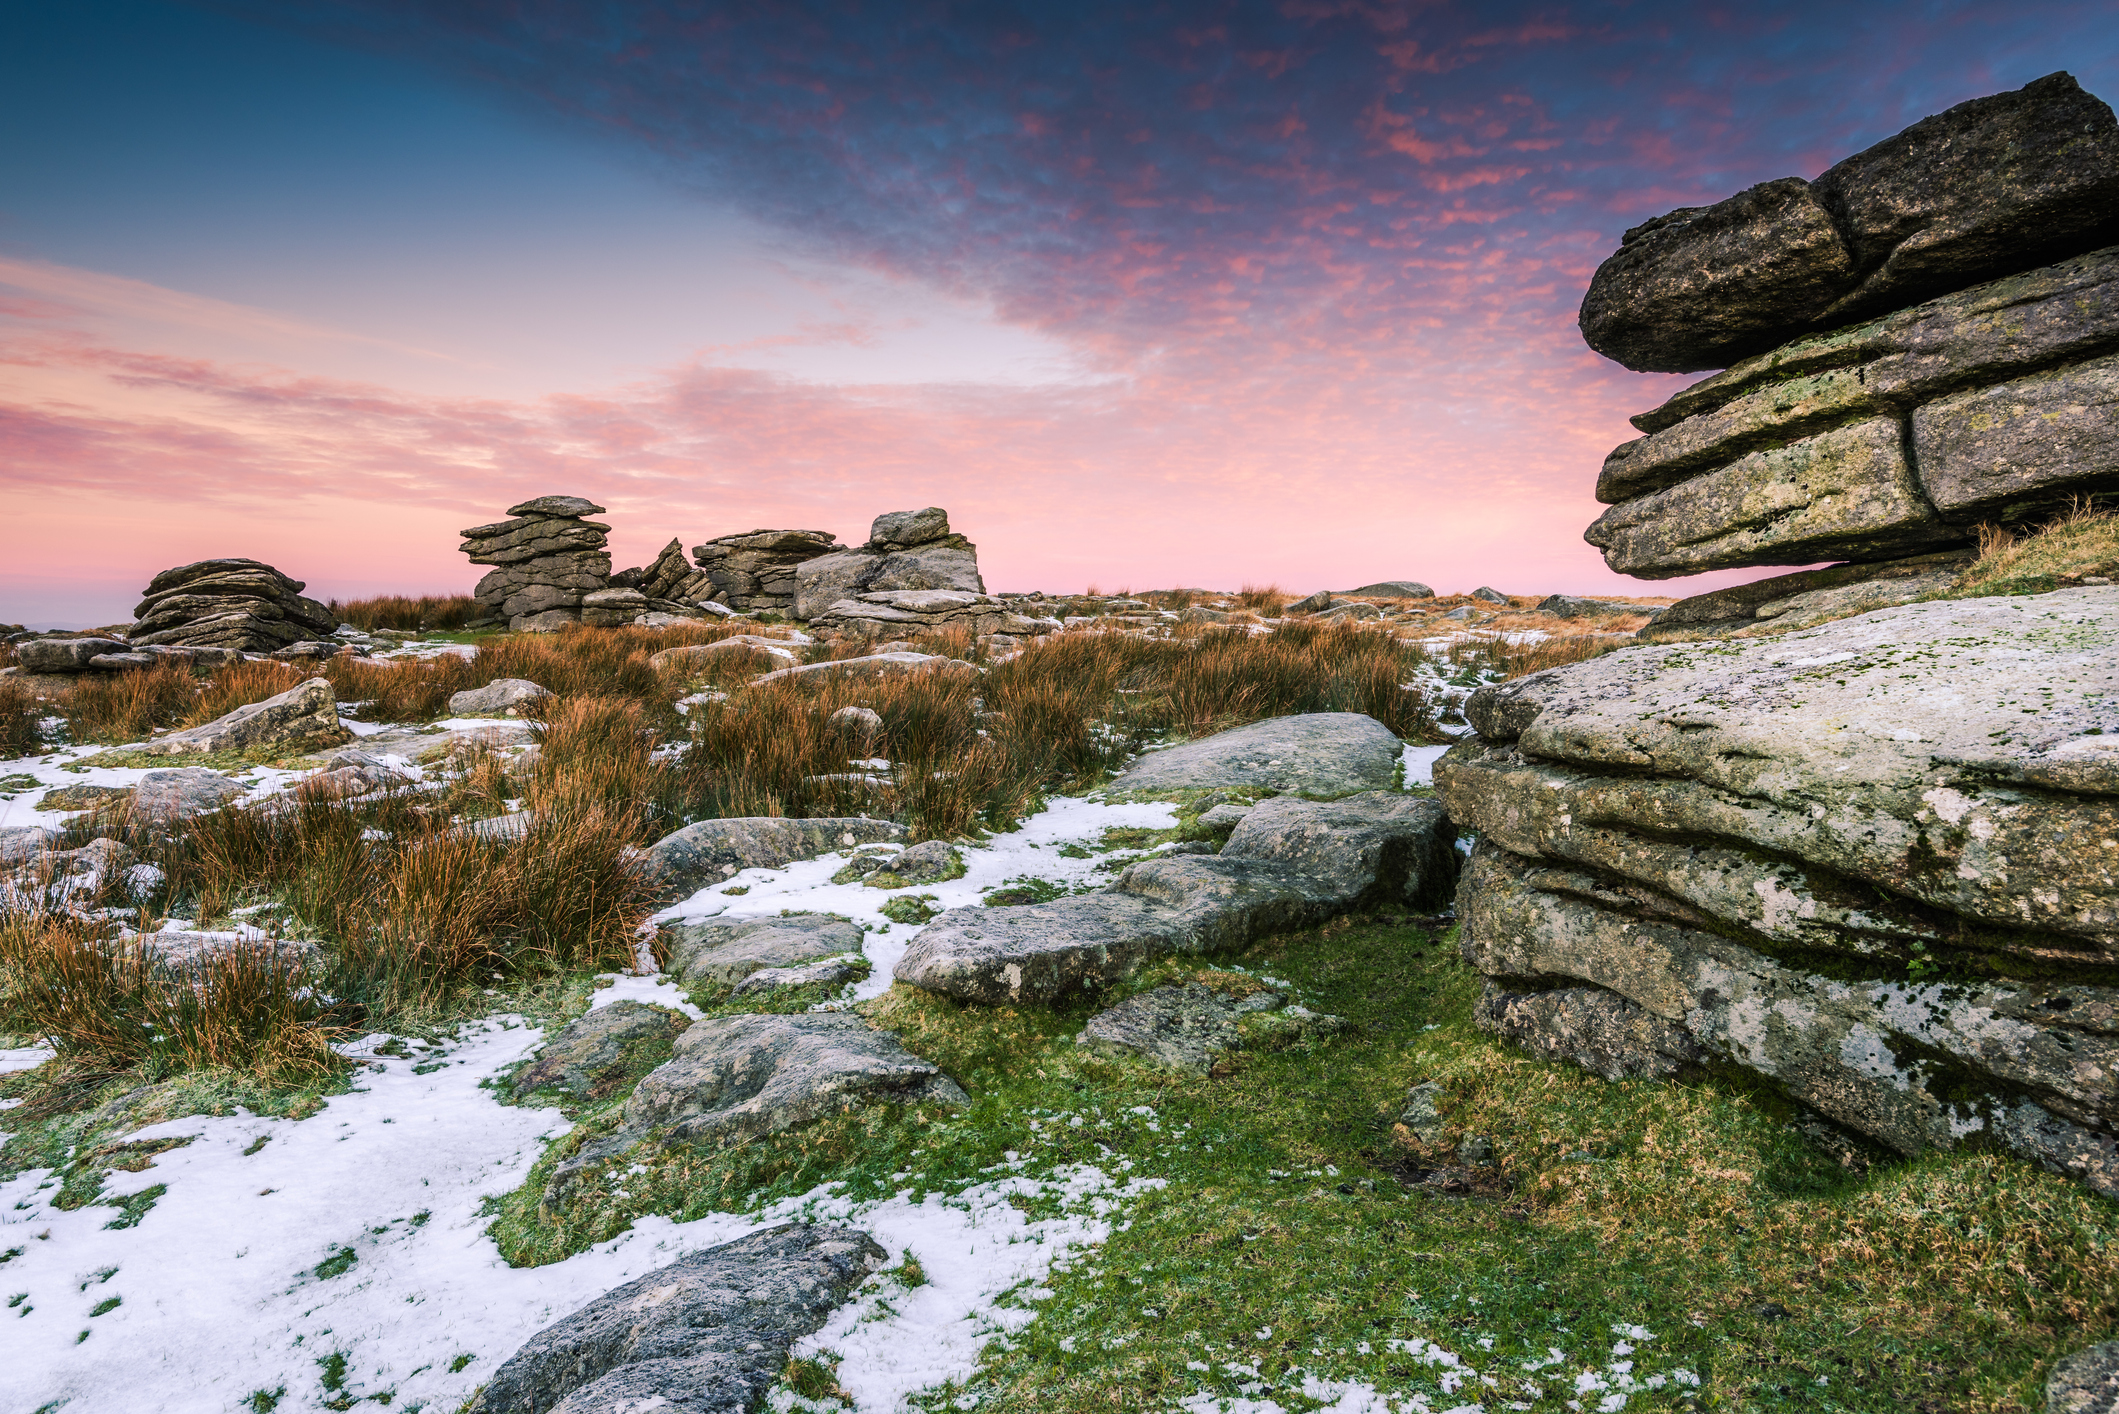 Cold and frosty morning hiking on hils at Dartmoor National Park, Devon, UK.